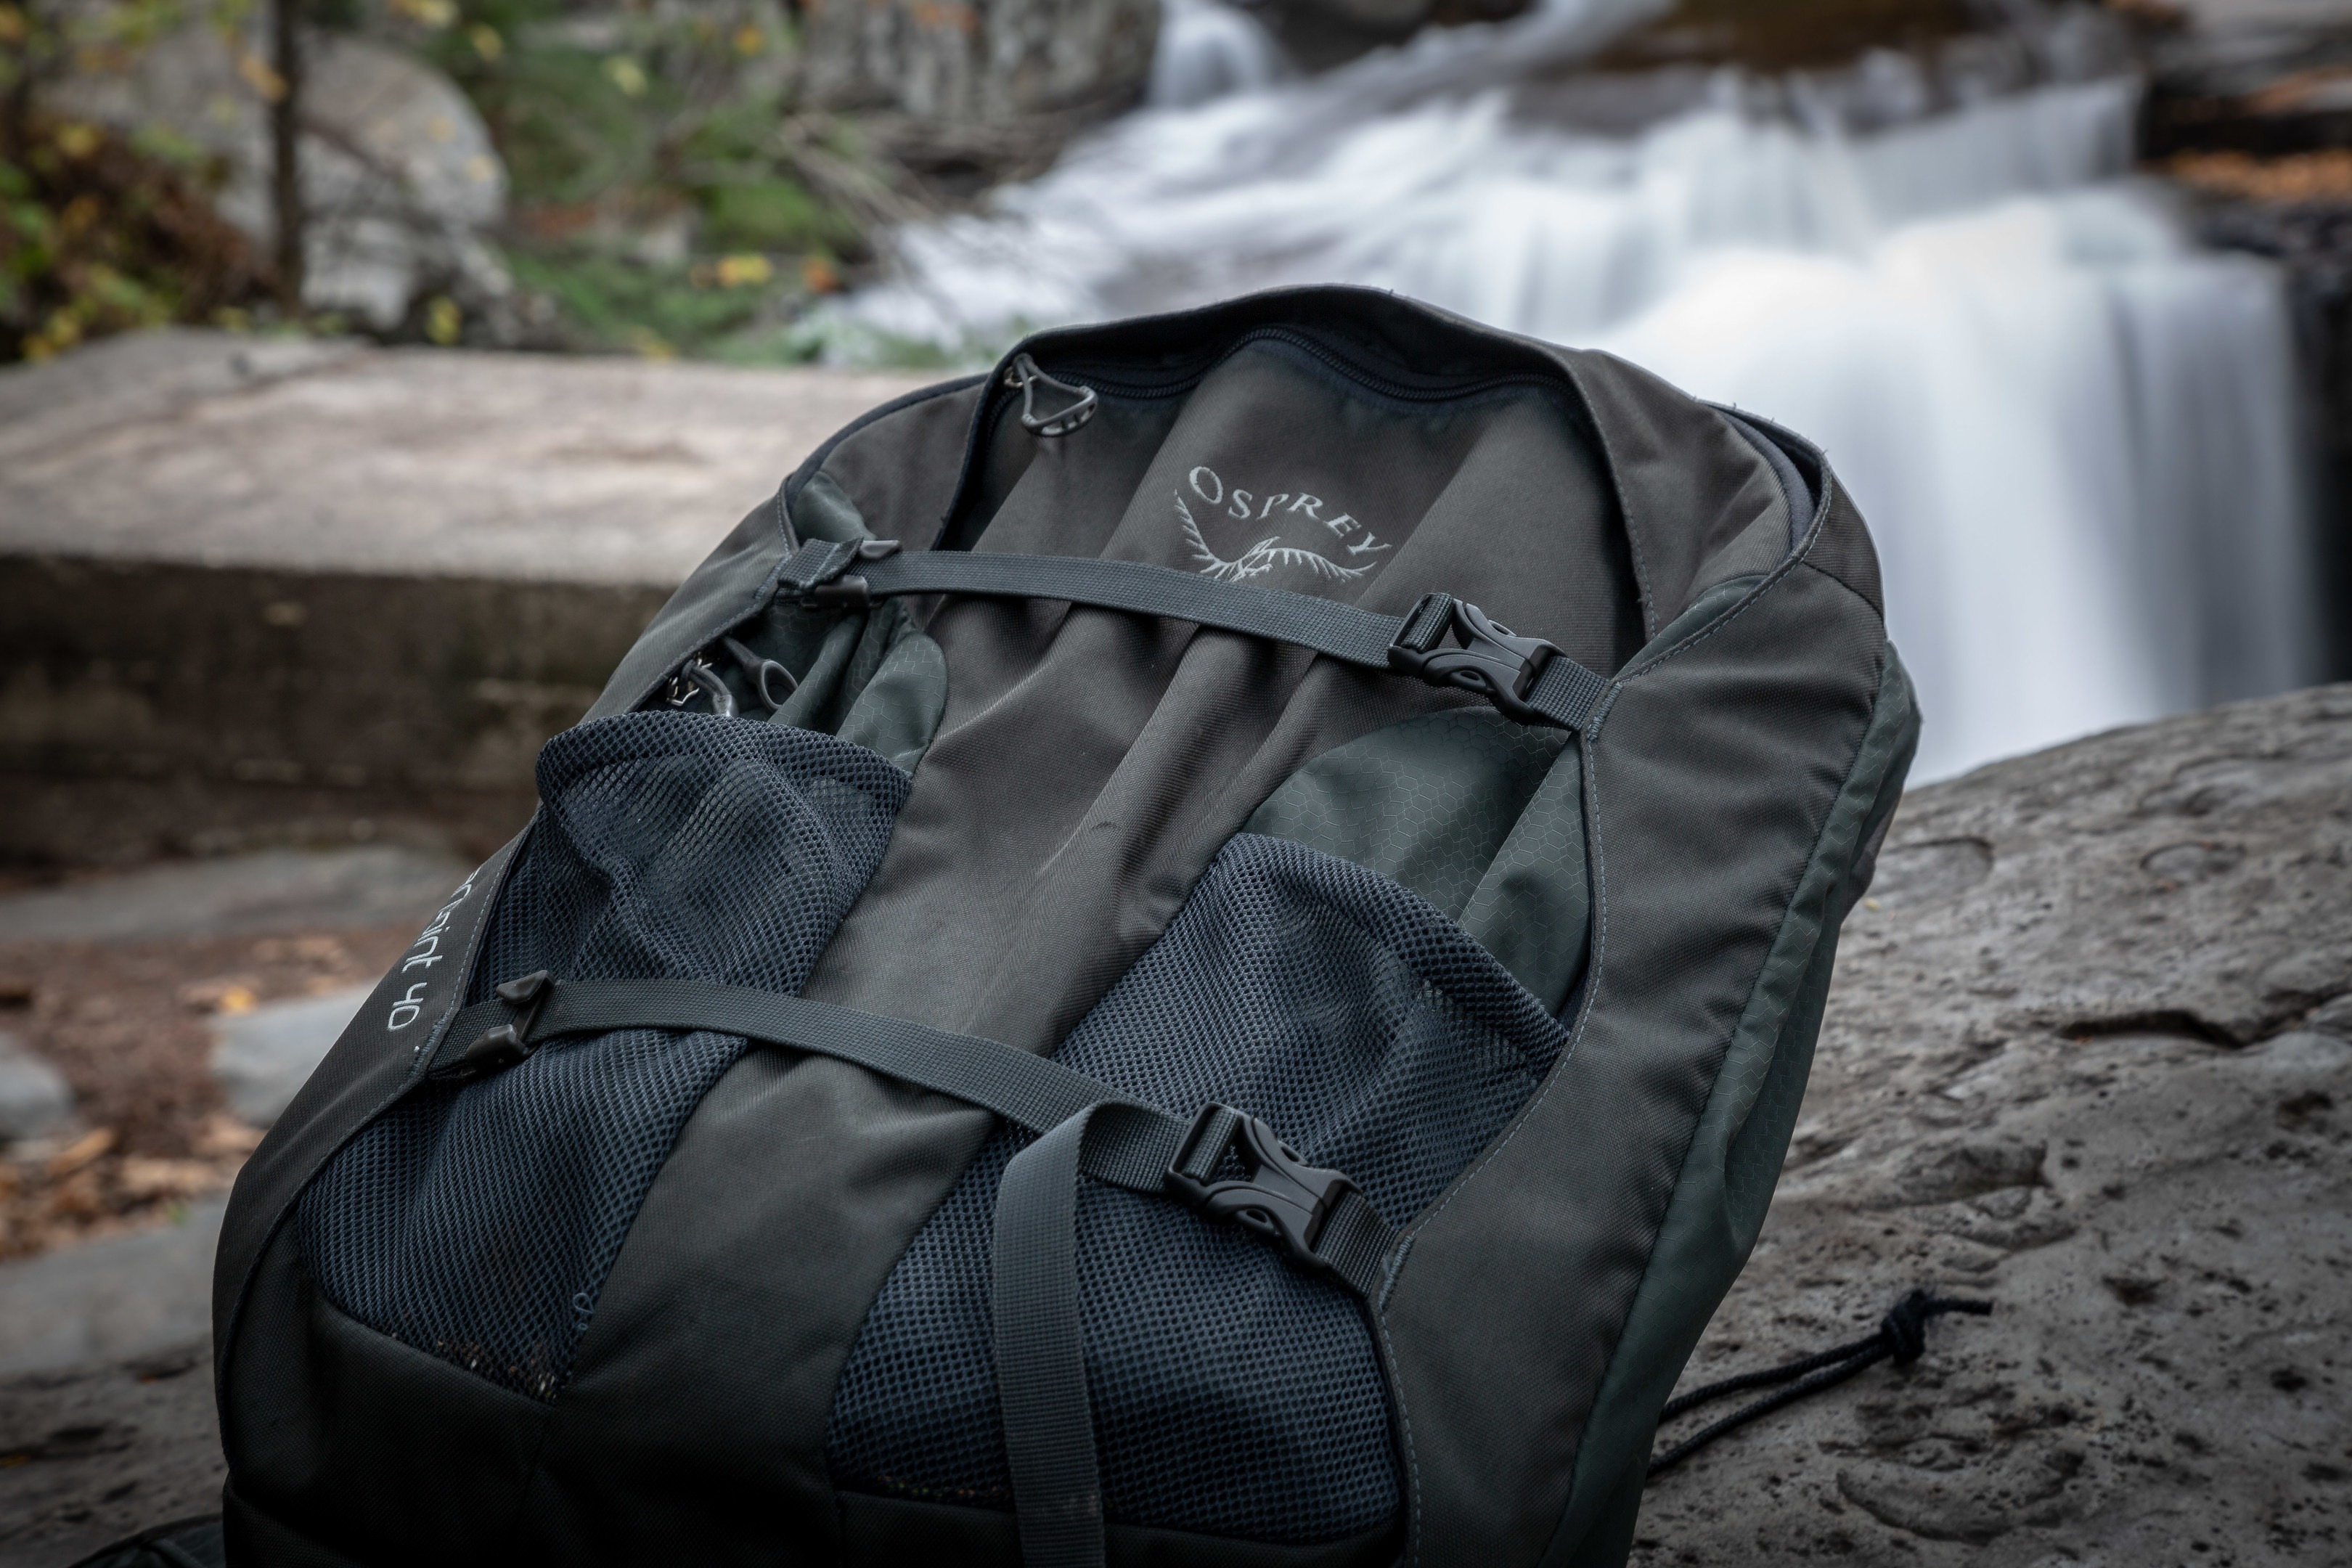 Gear review: Osprey Farpoint 40 Backpack